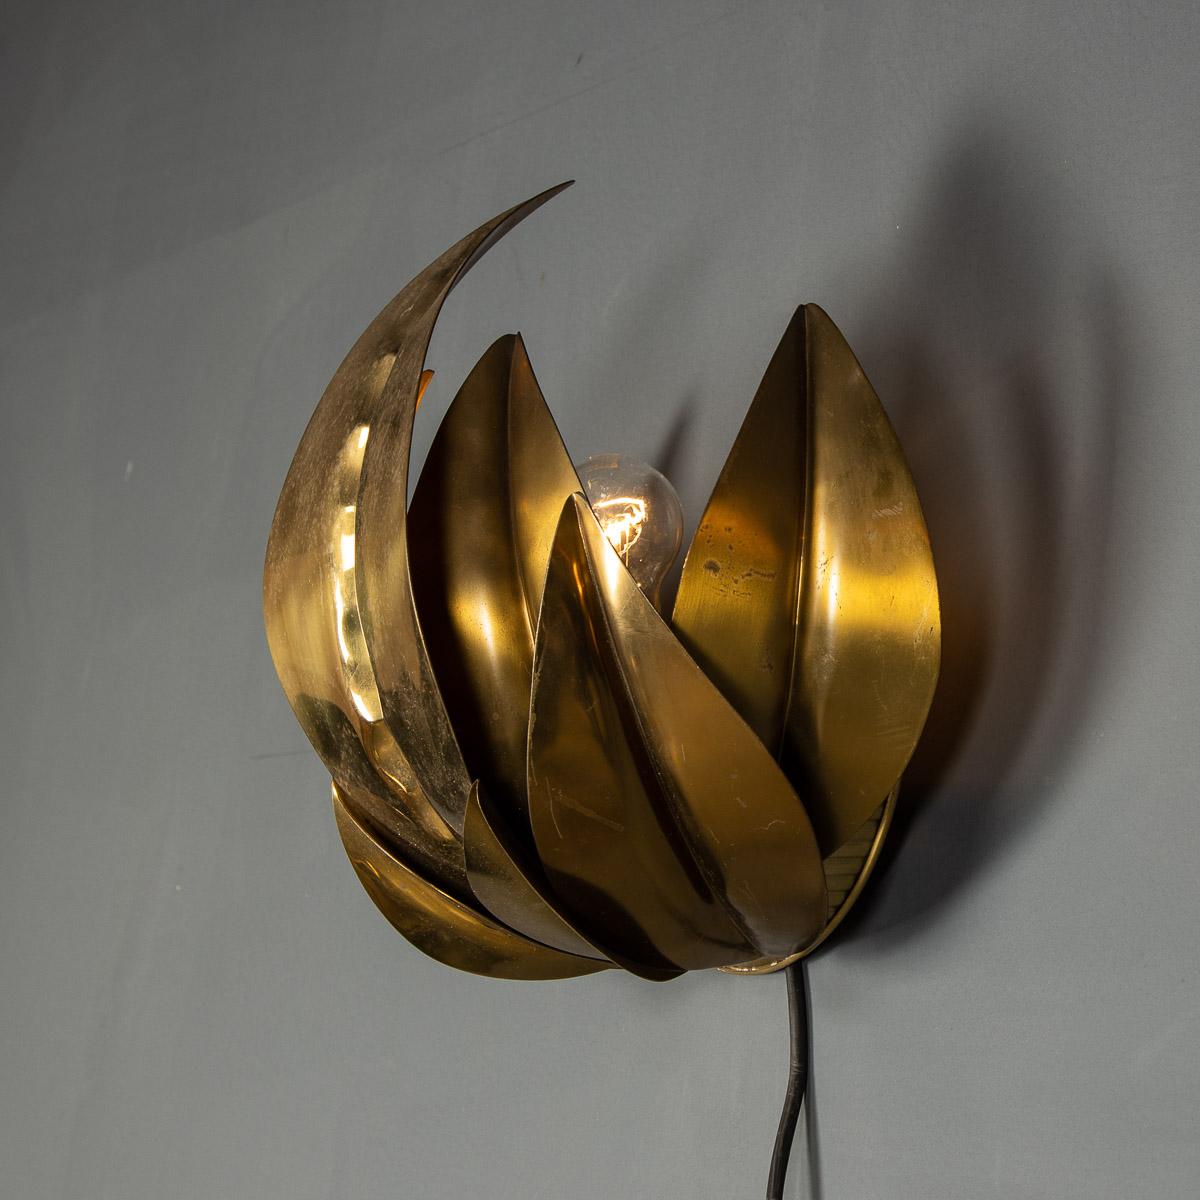 20th Century French Pair Of Brass Sconces Attributed To Maison Jansen, c.1970 For Sale 2